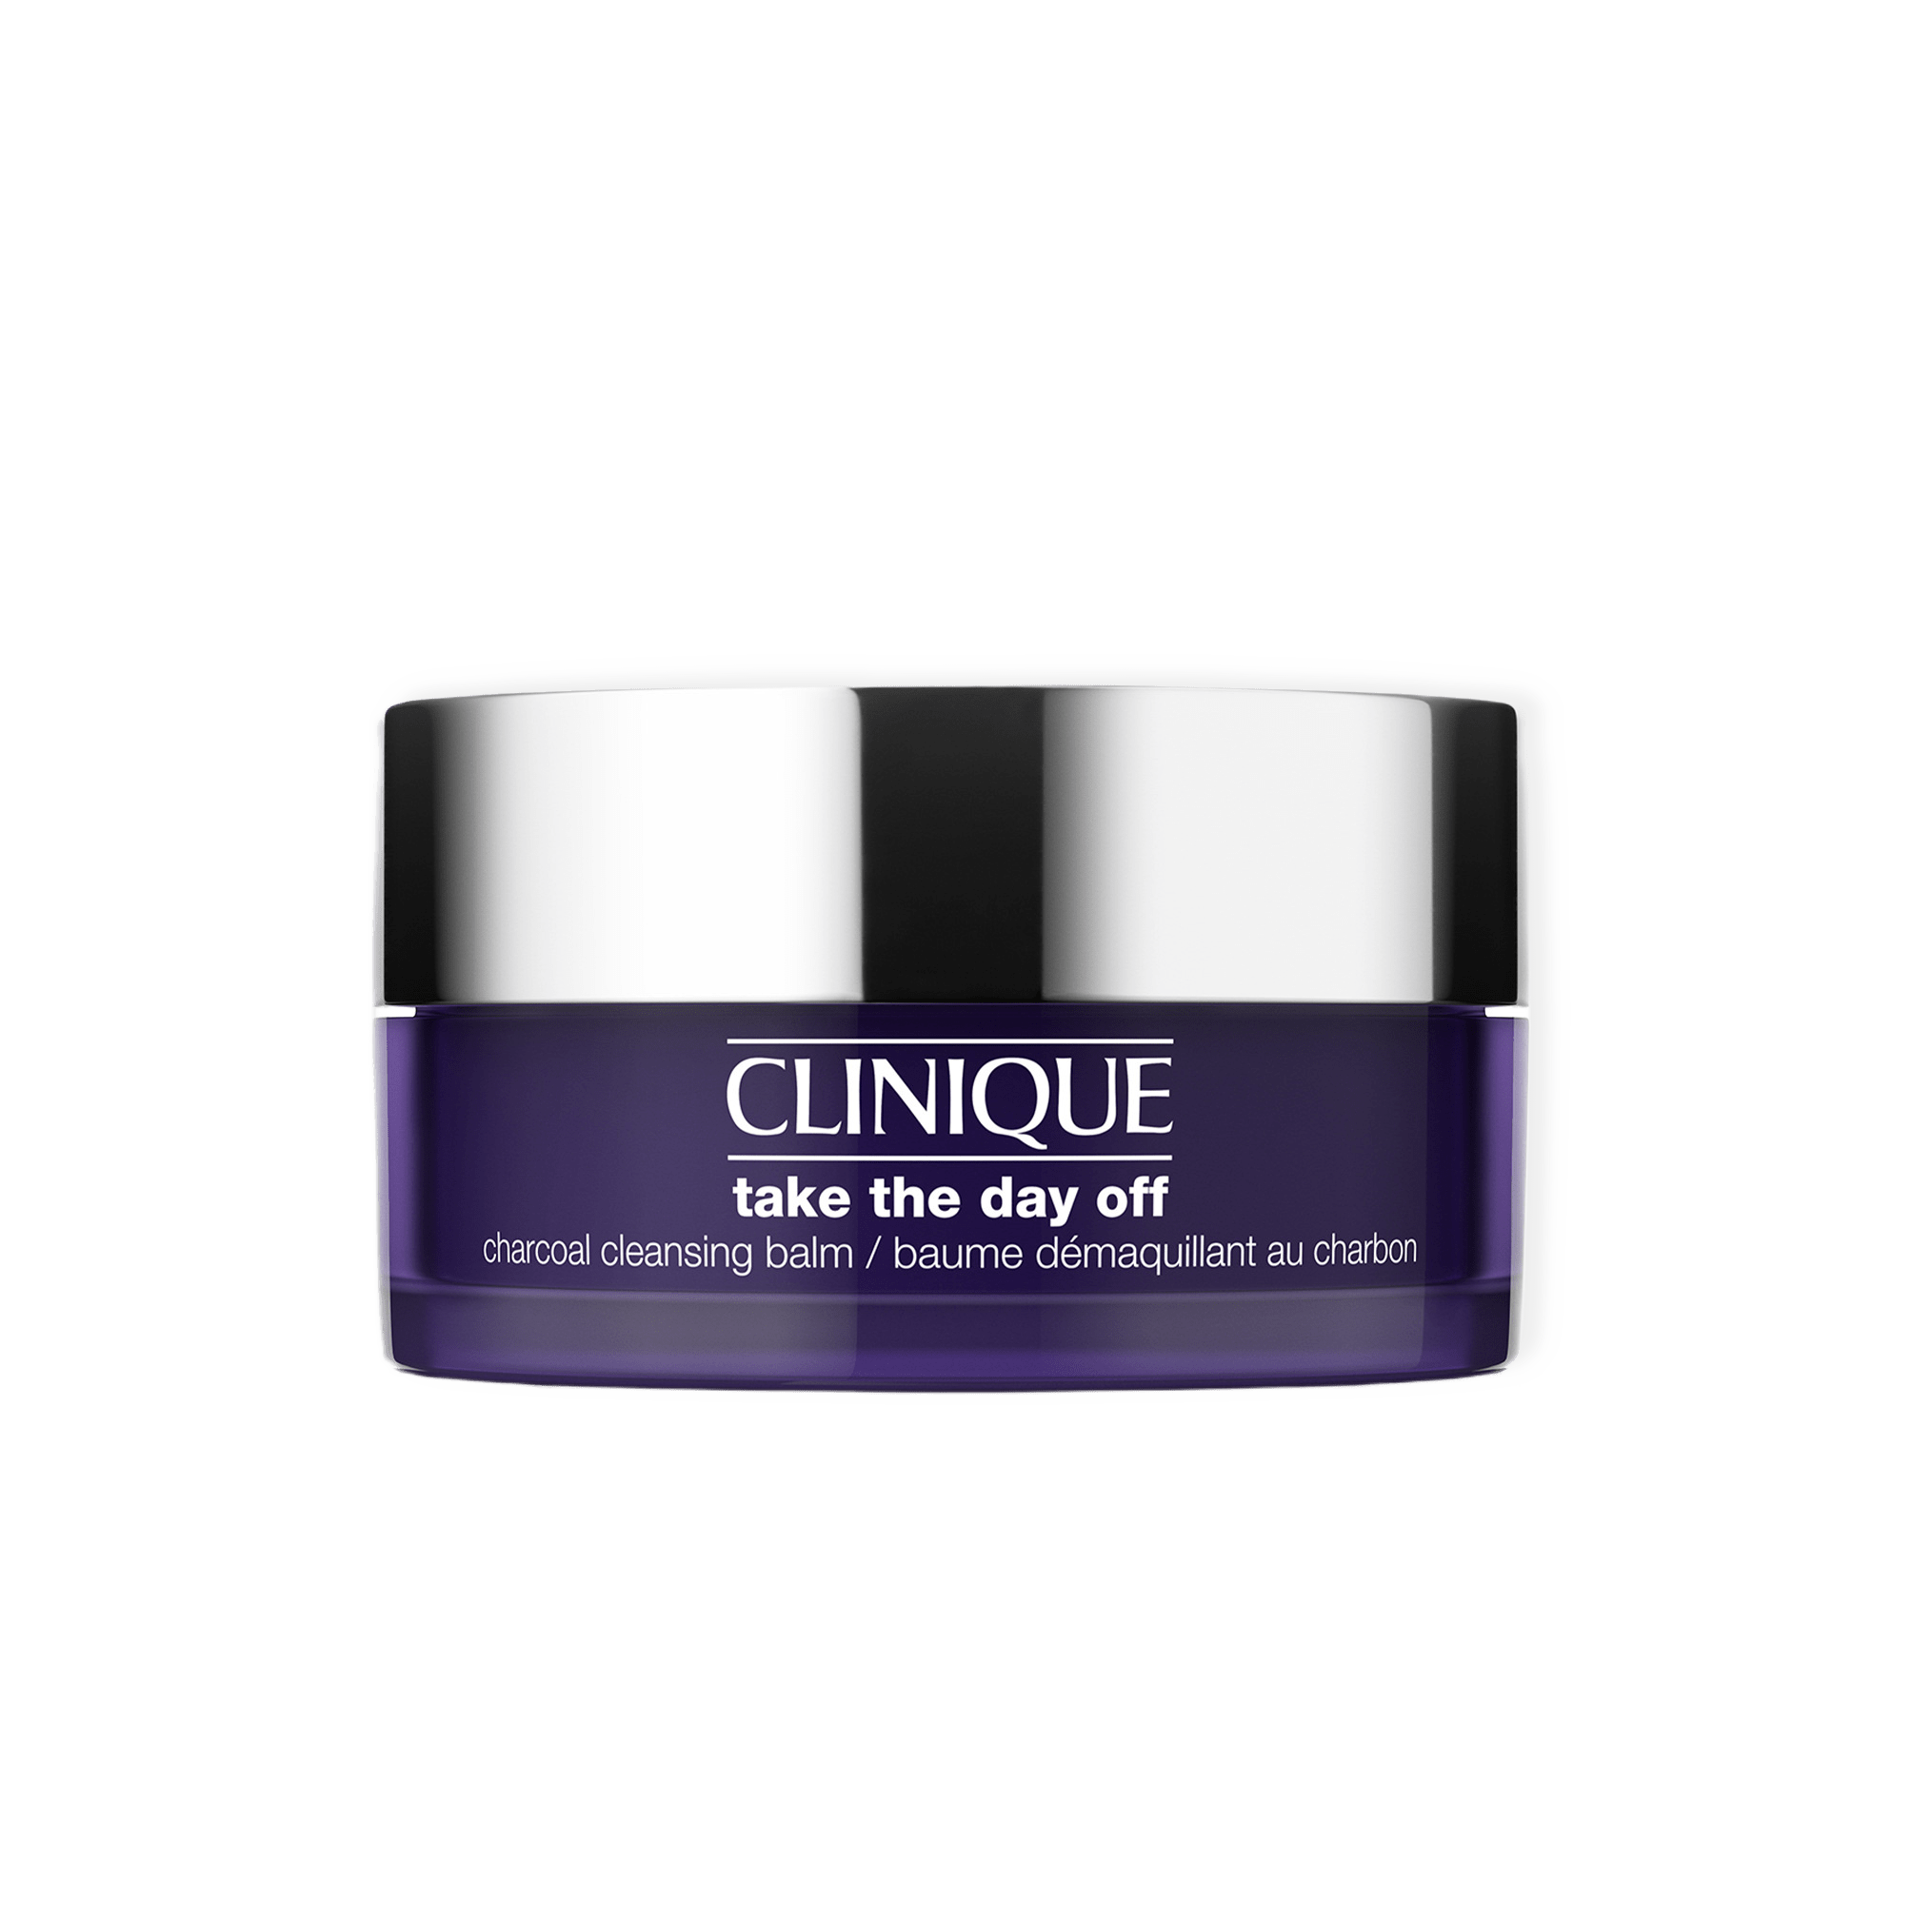 Take The Day Off Charcoal Detoxifying Cleansing Balm från Clinique